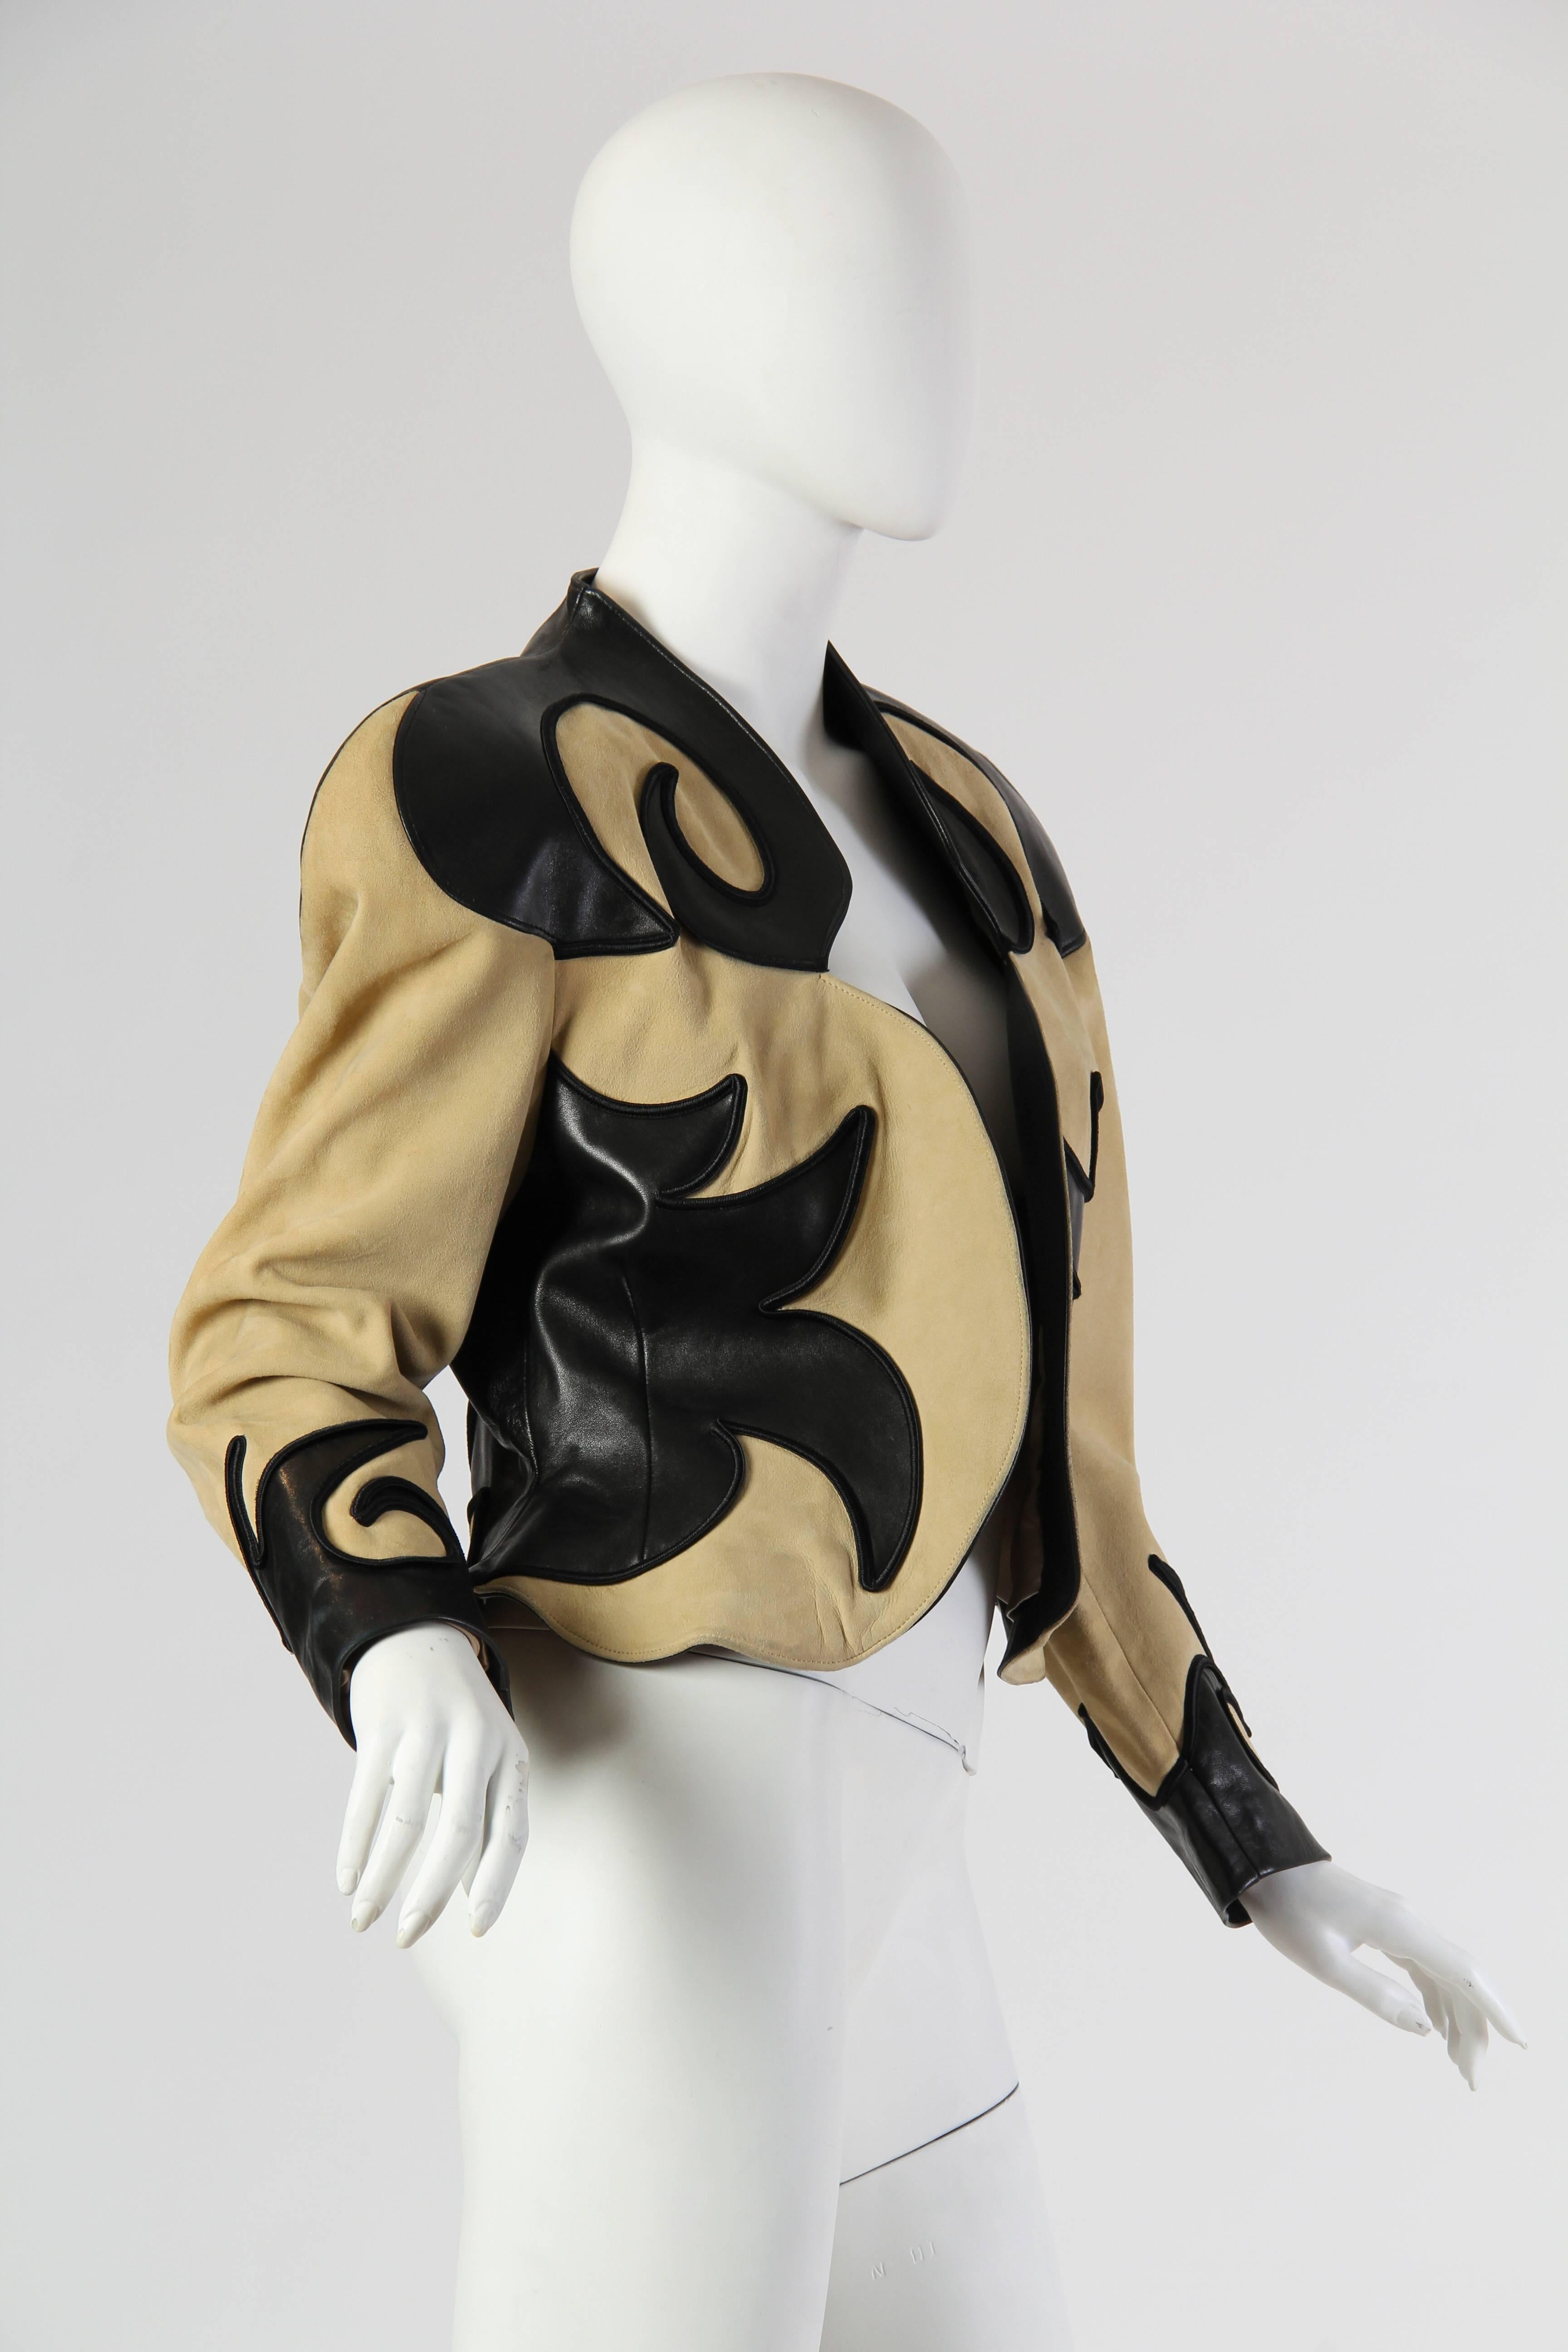 This is a stunning blazer from the 1980s by Jean Claude Jitrois. Cropped to hip-length, its slight peplum effect accents the waist and the small of the back to a highly flattering effect. The jacket is made in a soft camel tone, with incredible